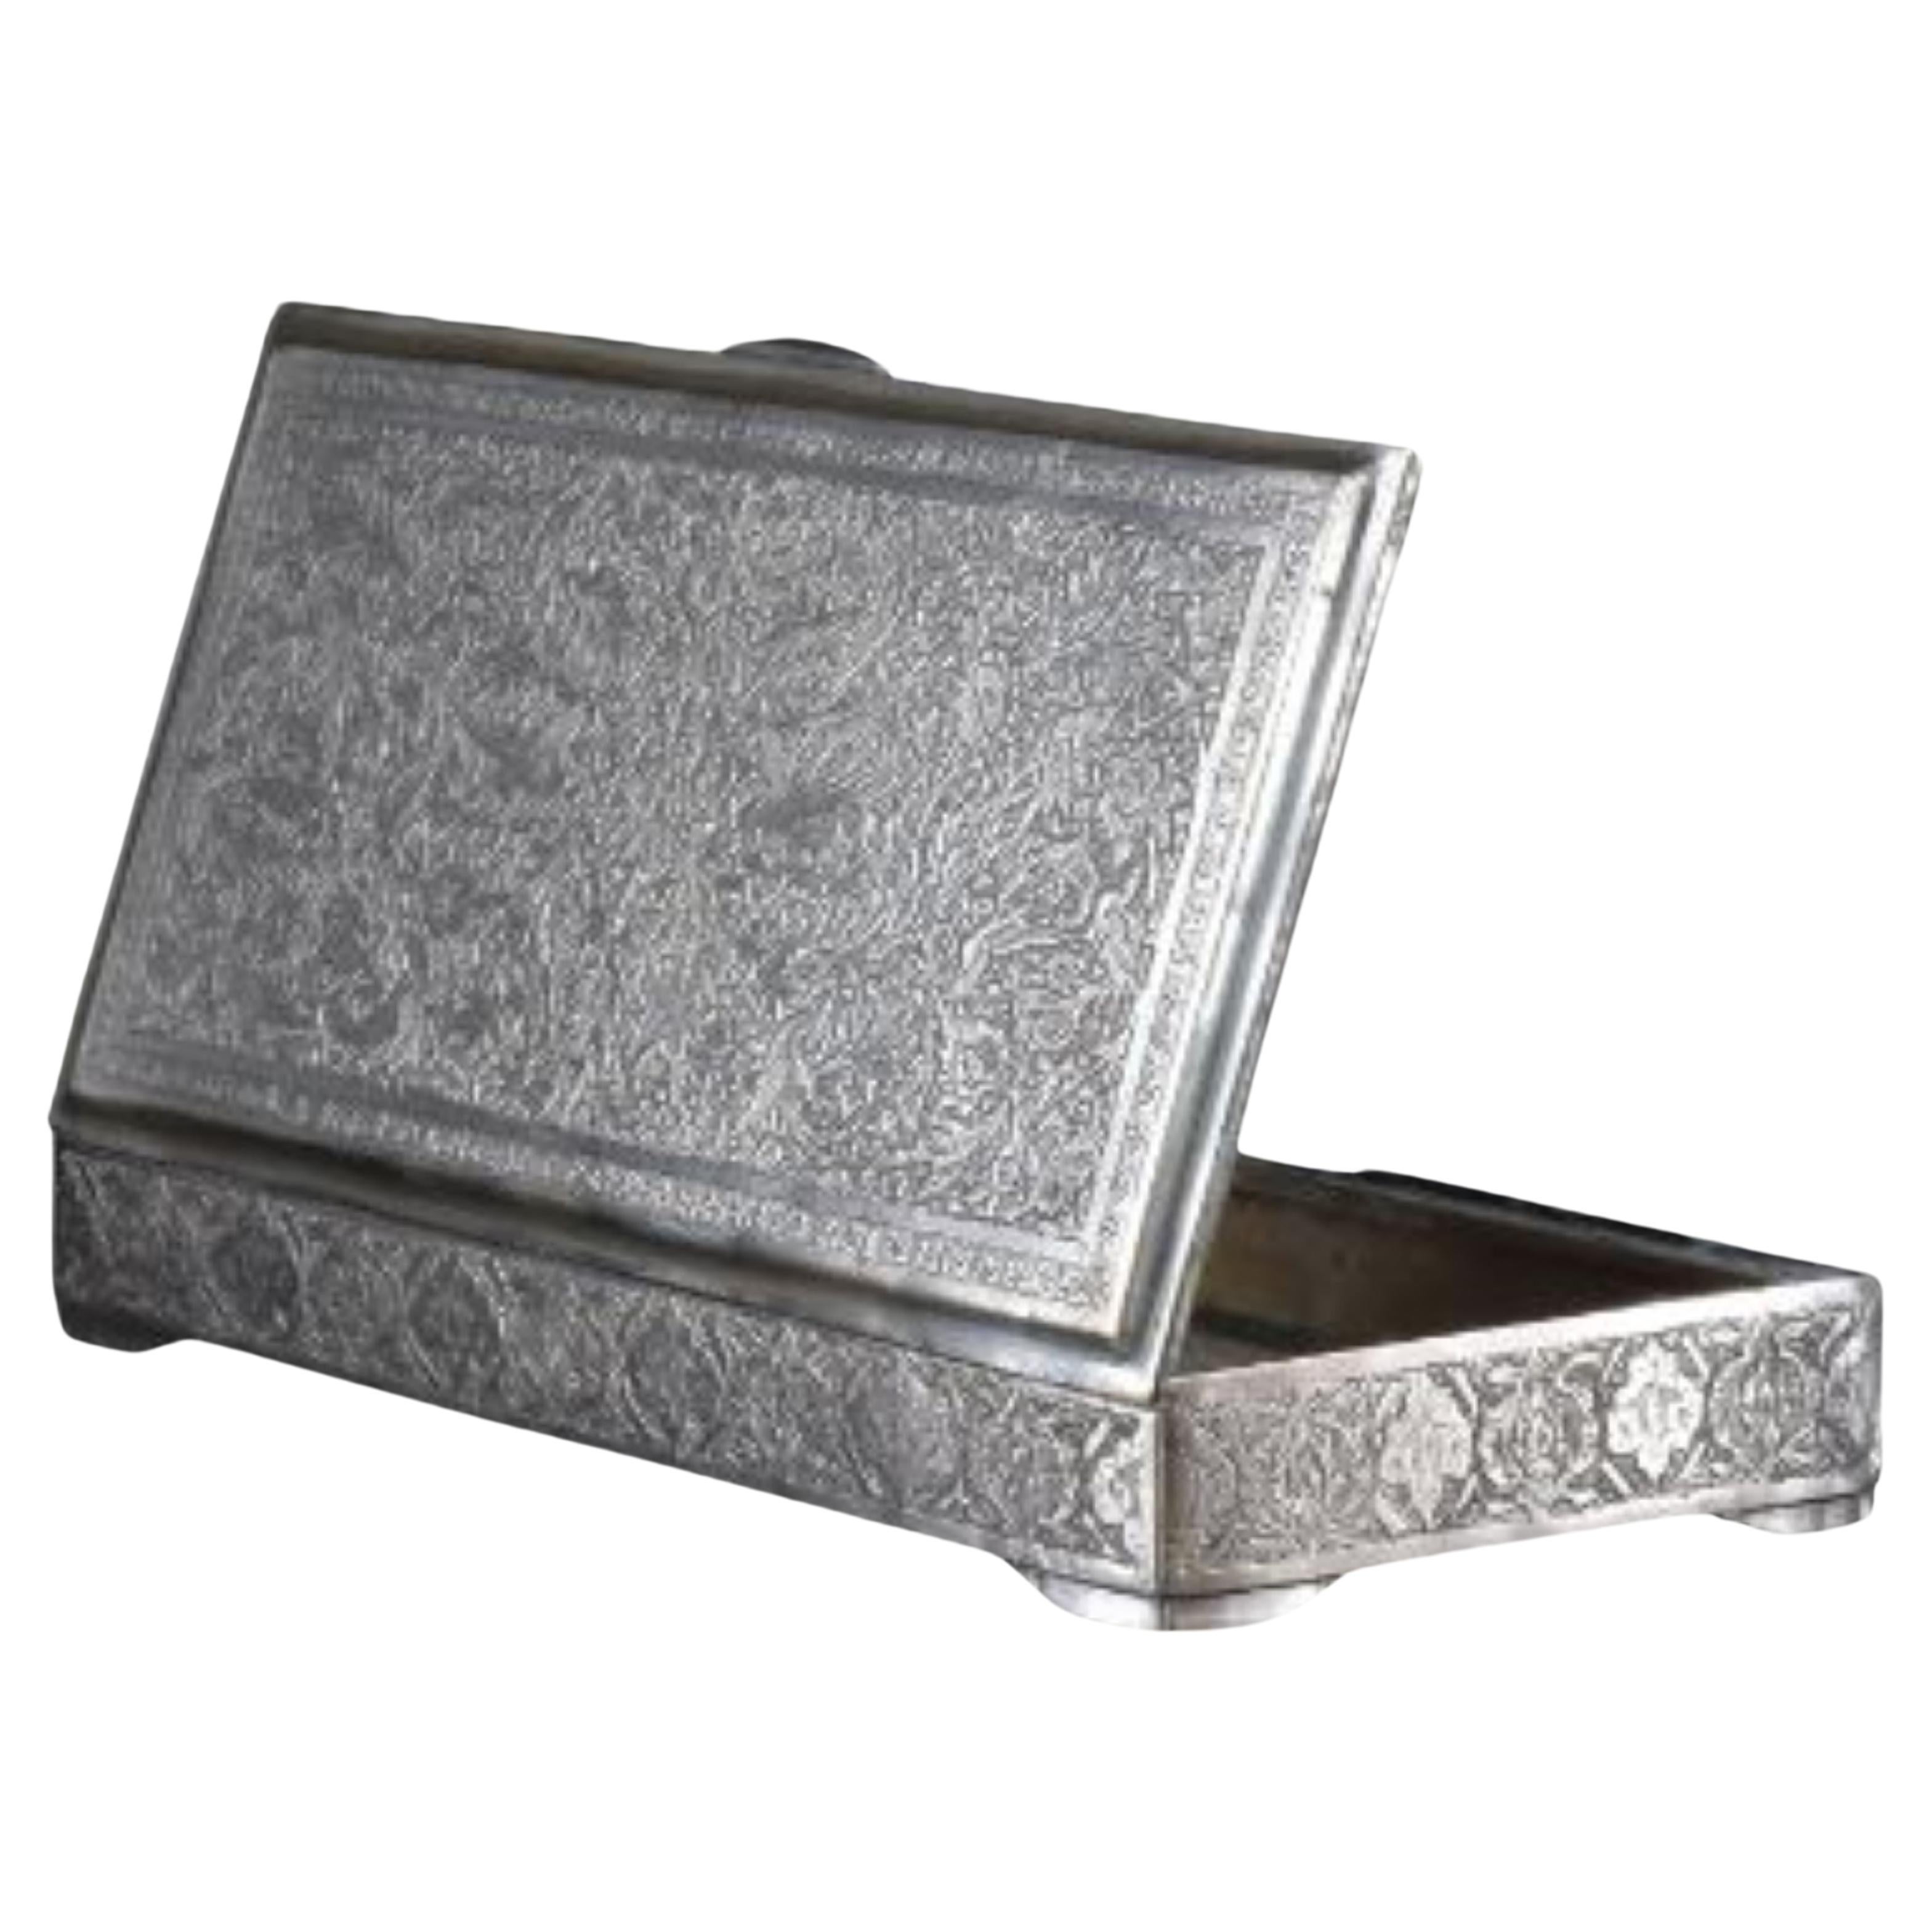 Beautifully handcrafted rectangular sterling silver box with a hinged cover and artisanal engraved ornamental patterns. A perfect gift to hold precious items, or jewellery, or to decorate your interior. 
weight: 403g

----

We are an exhibition